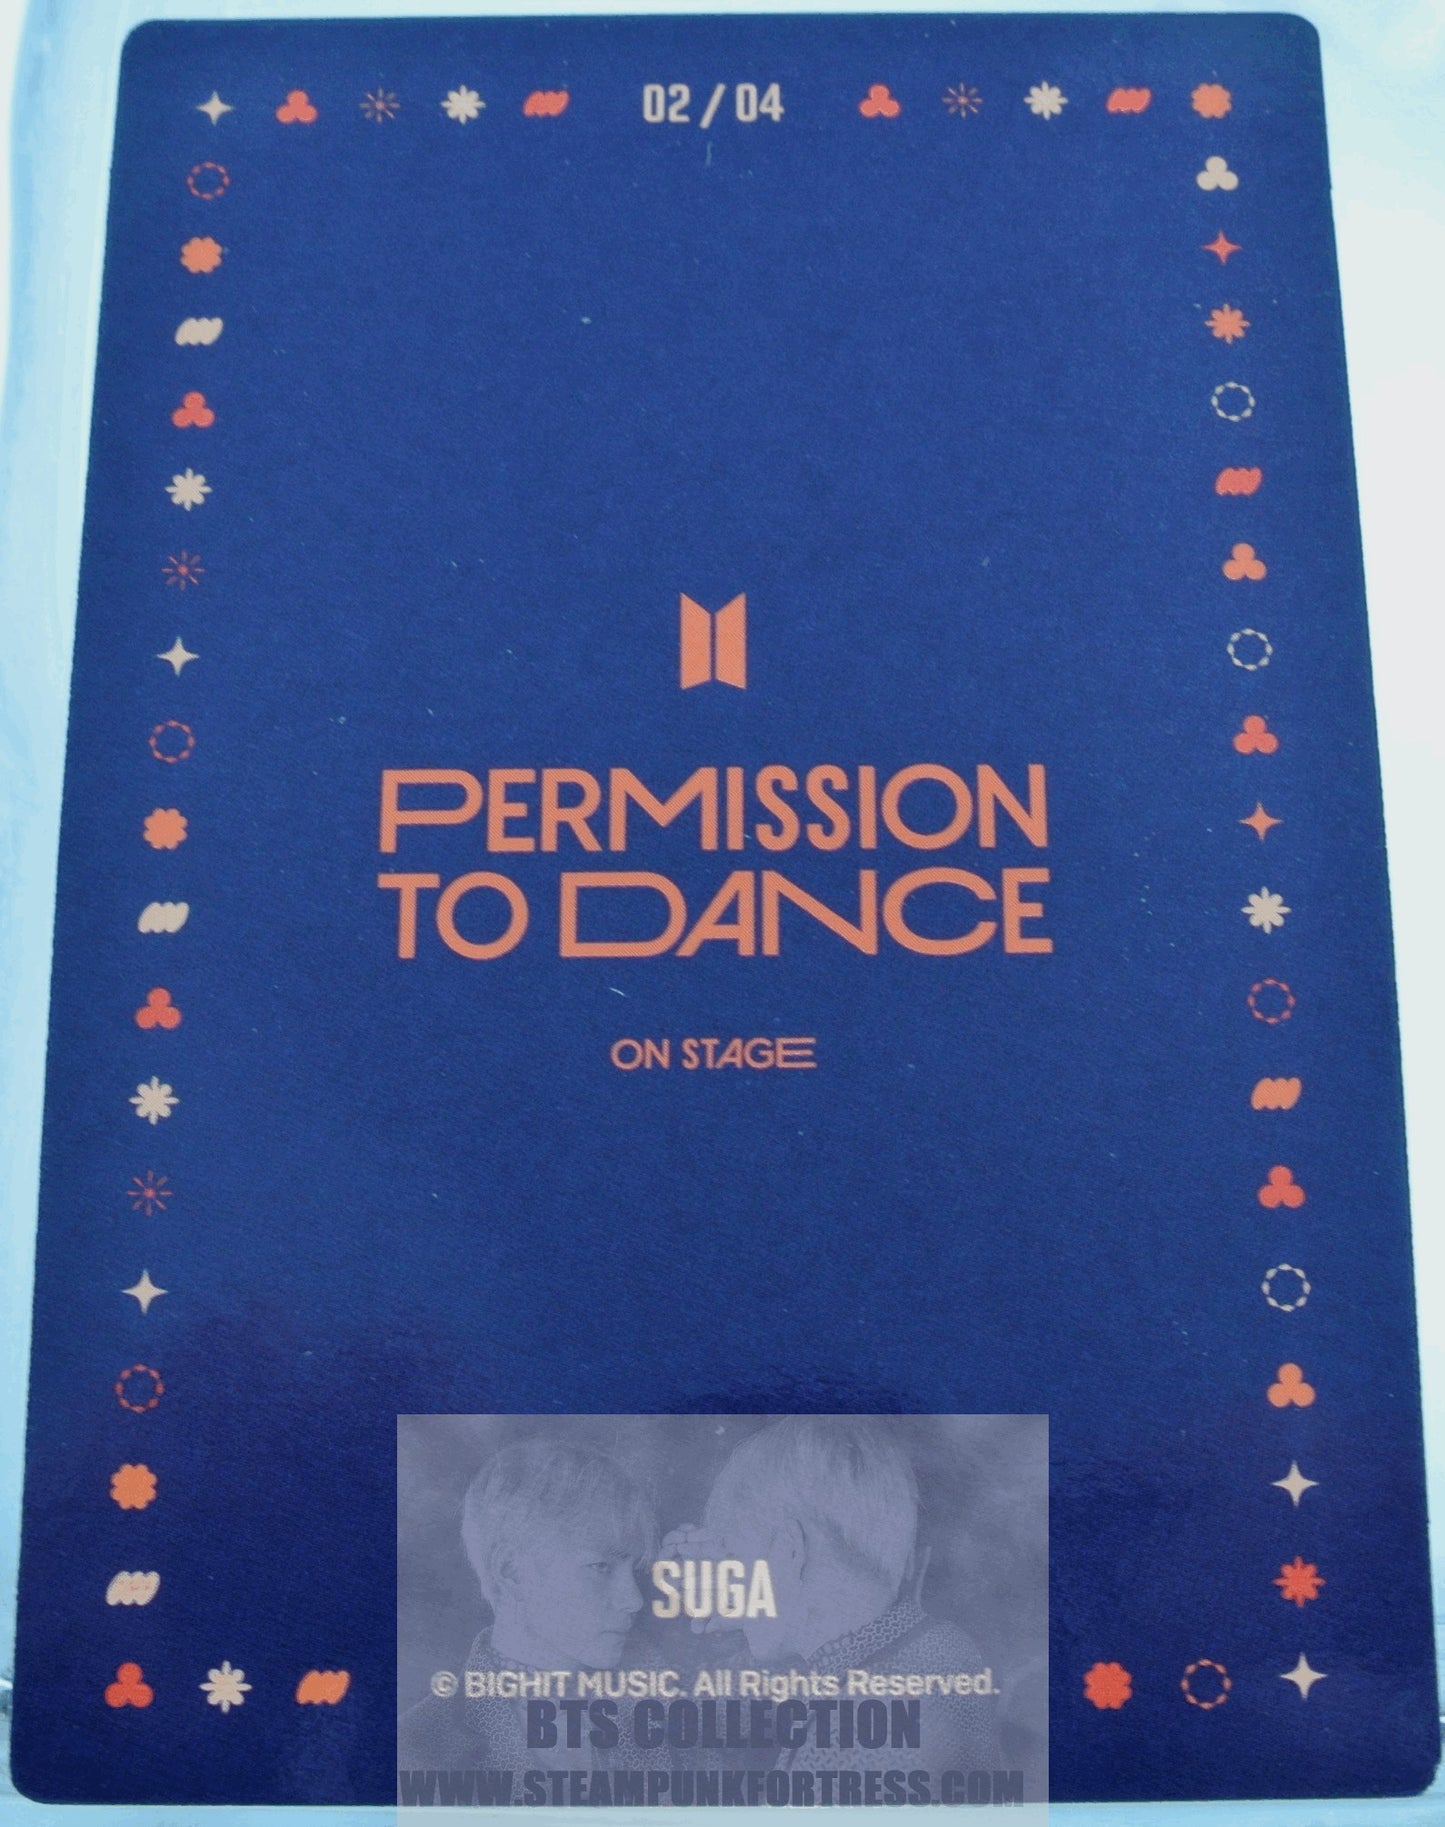 BTS SUGA MIN YOONGI YOON-GI PTD 2022 PERMISSION TO DANCE ON STAGE SEOUL #2 OF 4 PHOTOCARD PHOTO CARD NEW OFFICIAL MERCHANDISE